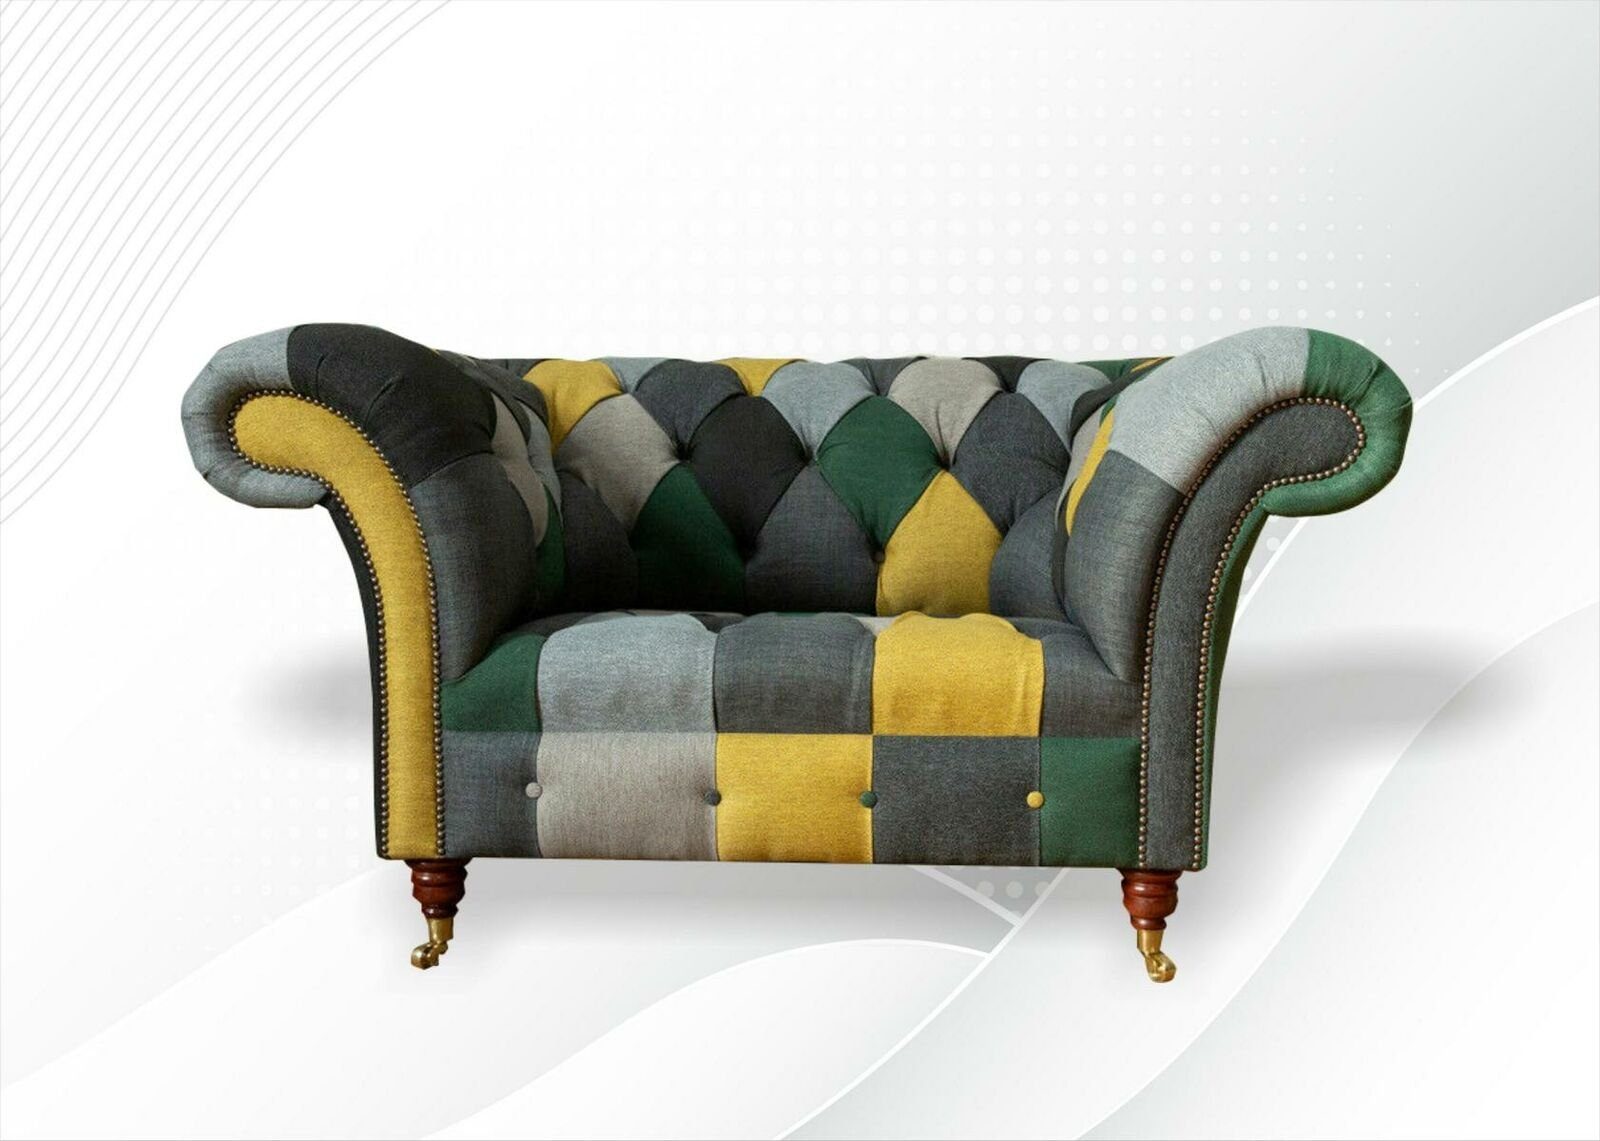 JVmoebel Chesterfield-Sessel, Chesterfield Sessel Fernseh Couch 1,5 Sitzer Sofa Textil Stoff